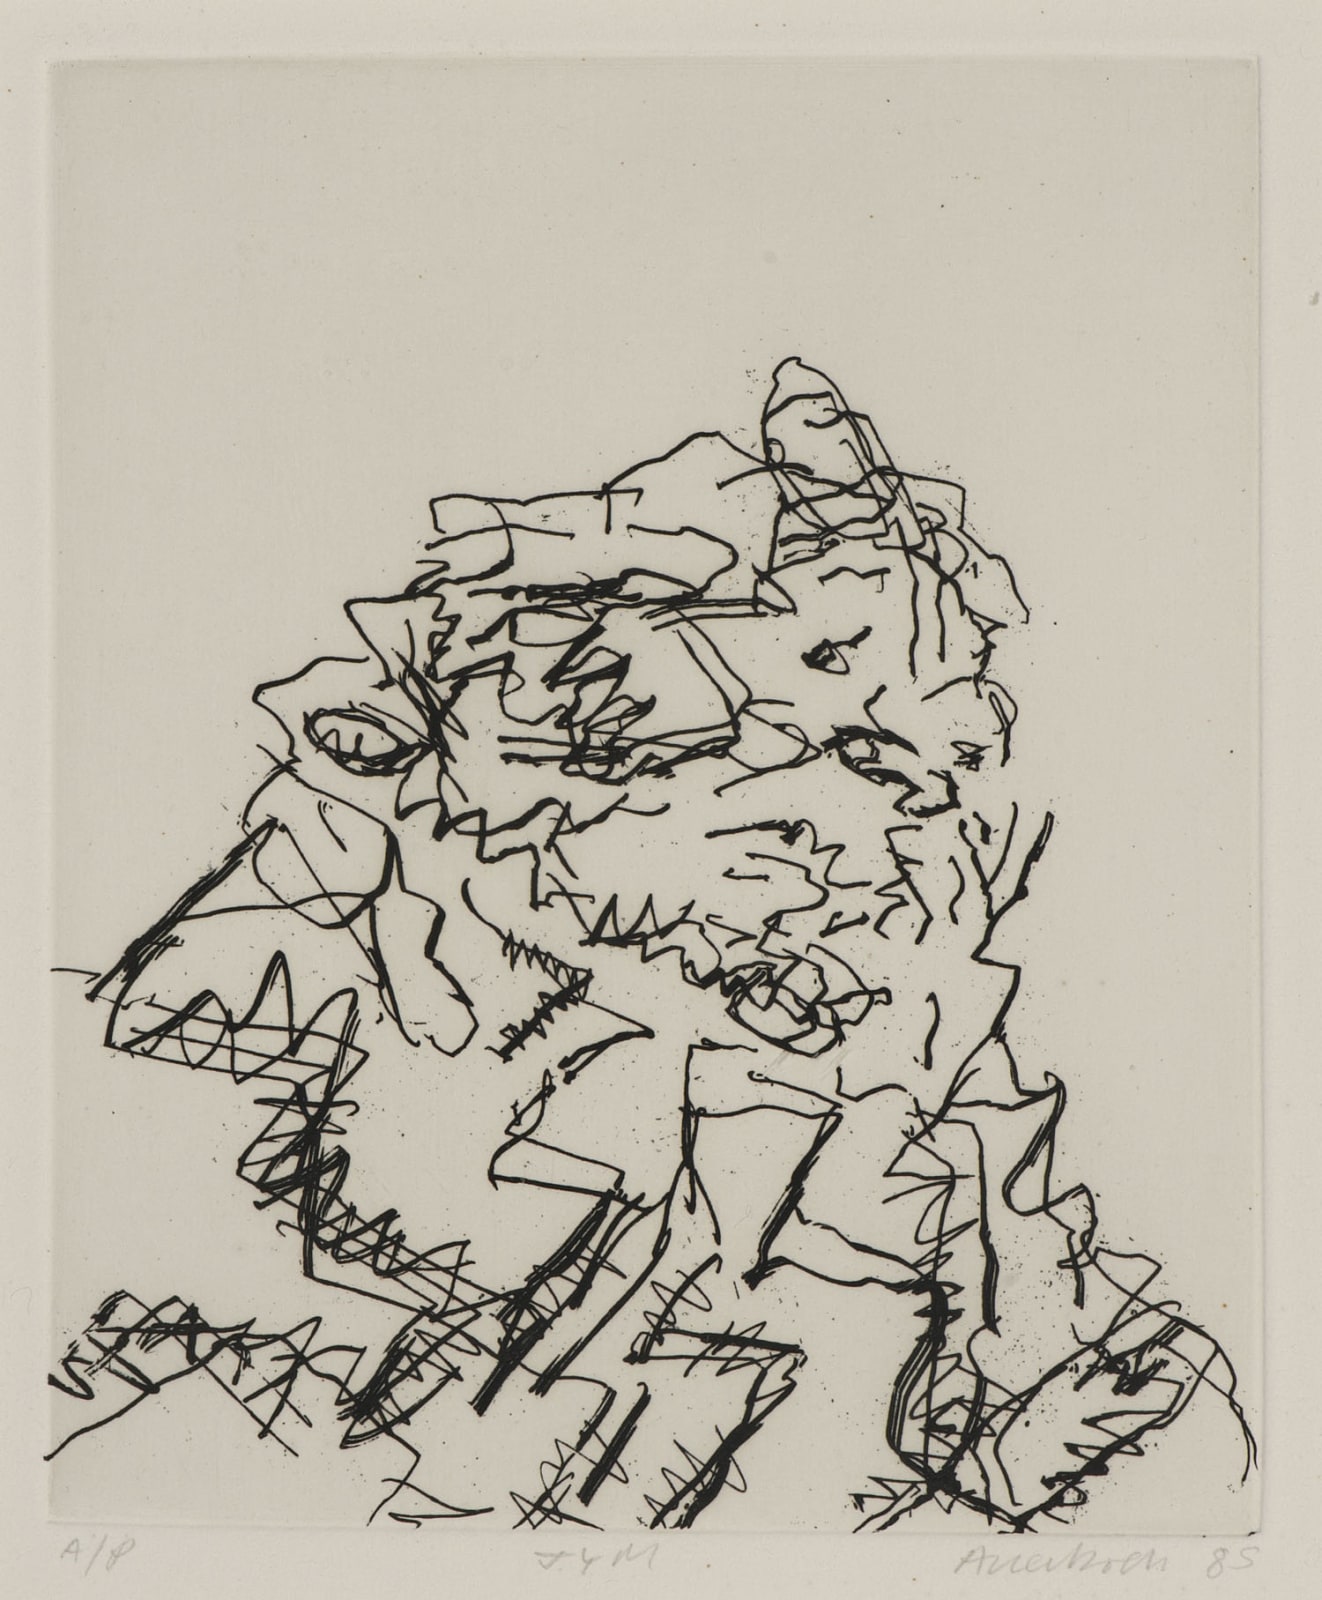 Frank Auerbach (1931-) J.Y.M., Series: Part of Seven Portraits 1989 Etching, printed on Somerset white paper, artist's proof outside the published edition of 50 20 x 16.5 cm Ben Uri Collection © Frank Auerbach, courtesy Marlborough Fine Art To see and discover more about this artist click here